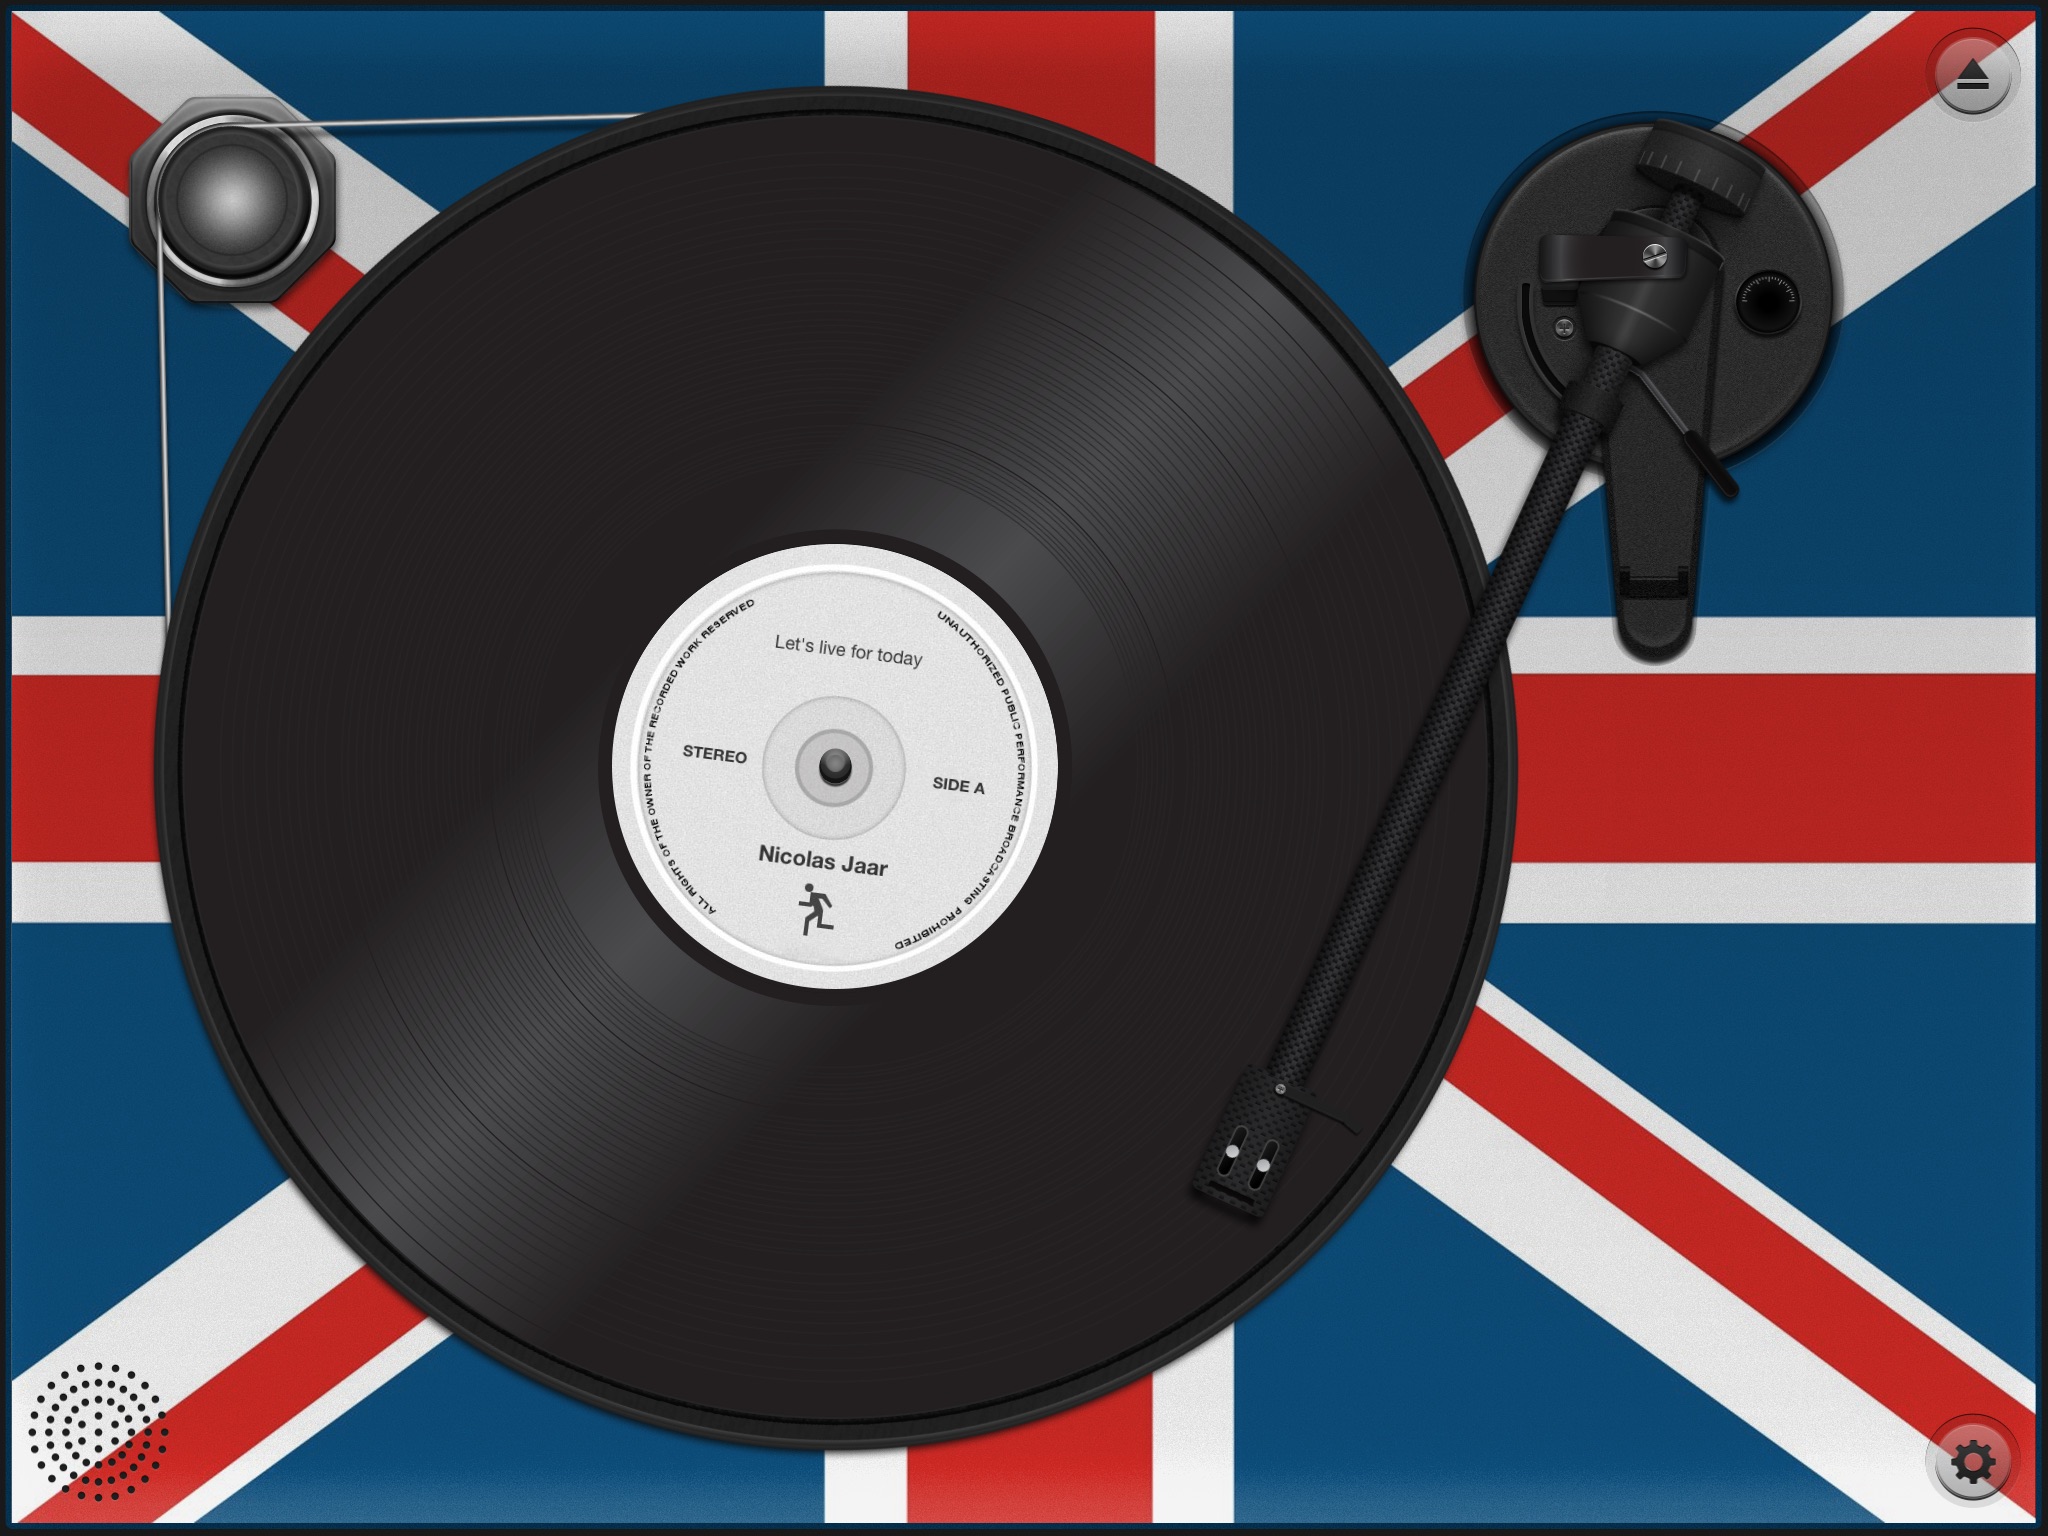 Turntable Limited Edition screenshot 2